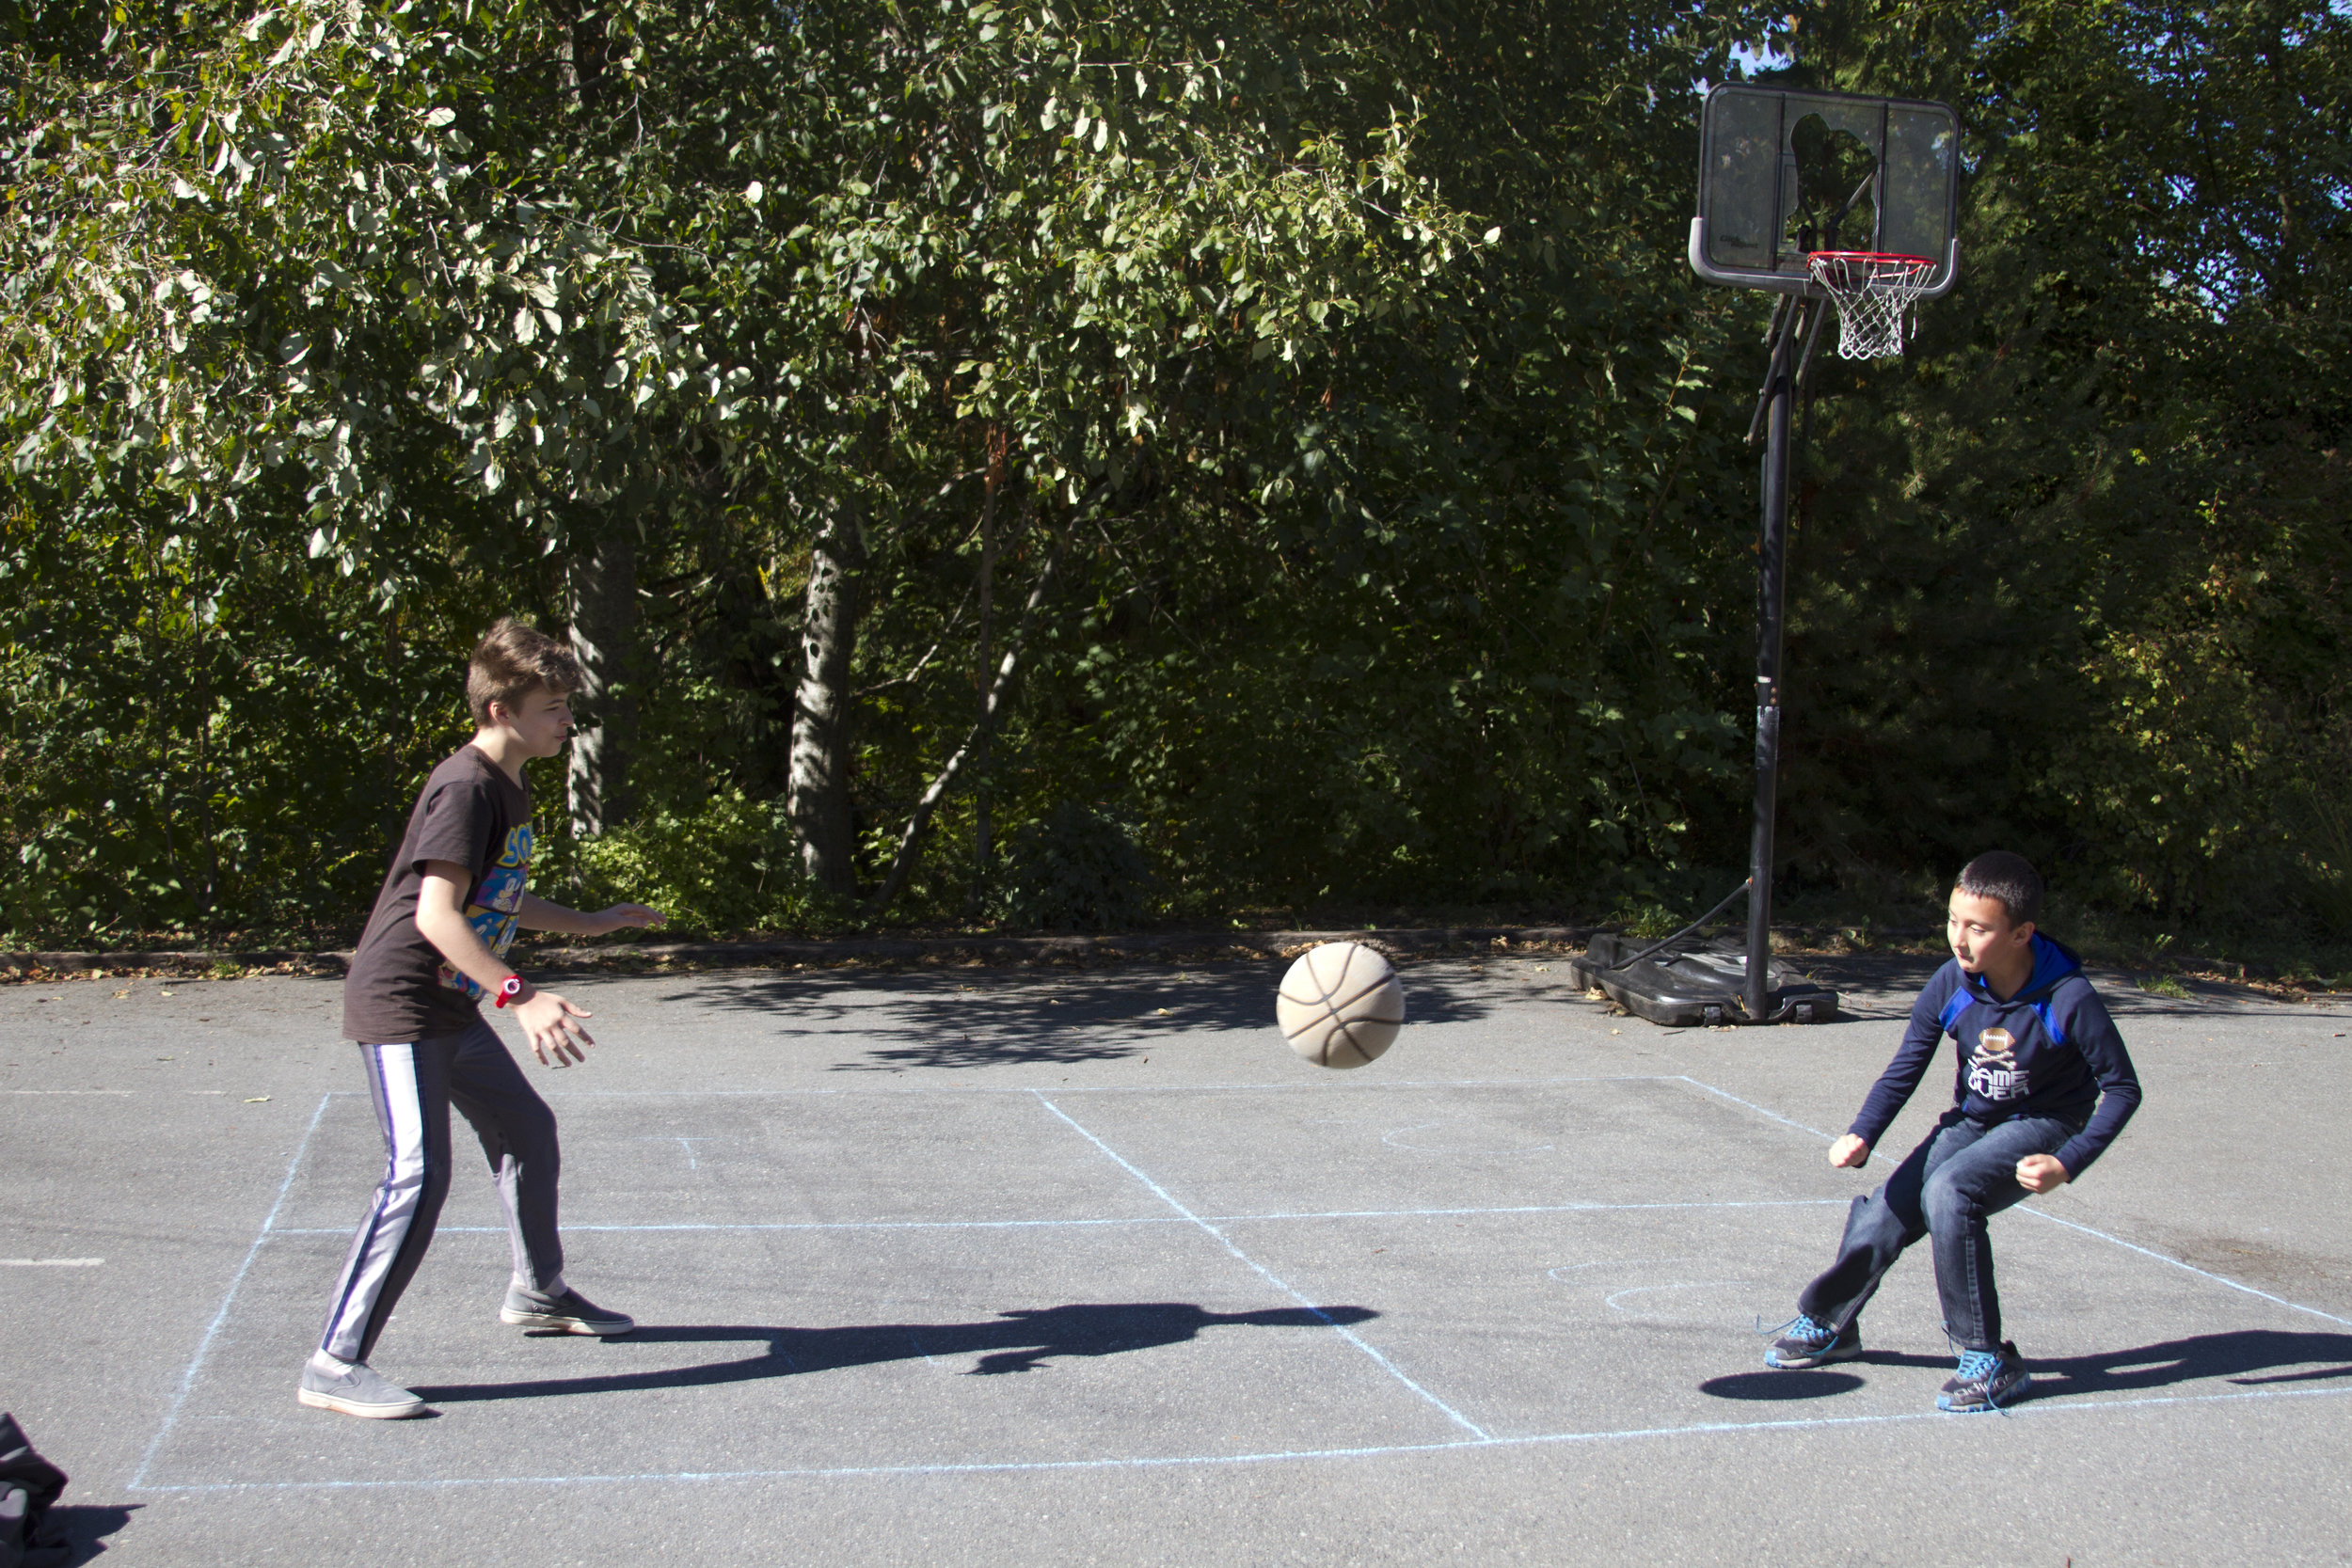 Two students playing on a Foursquare court.